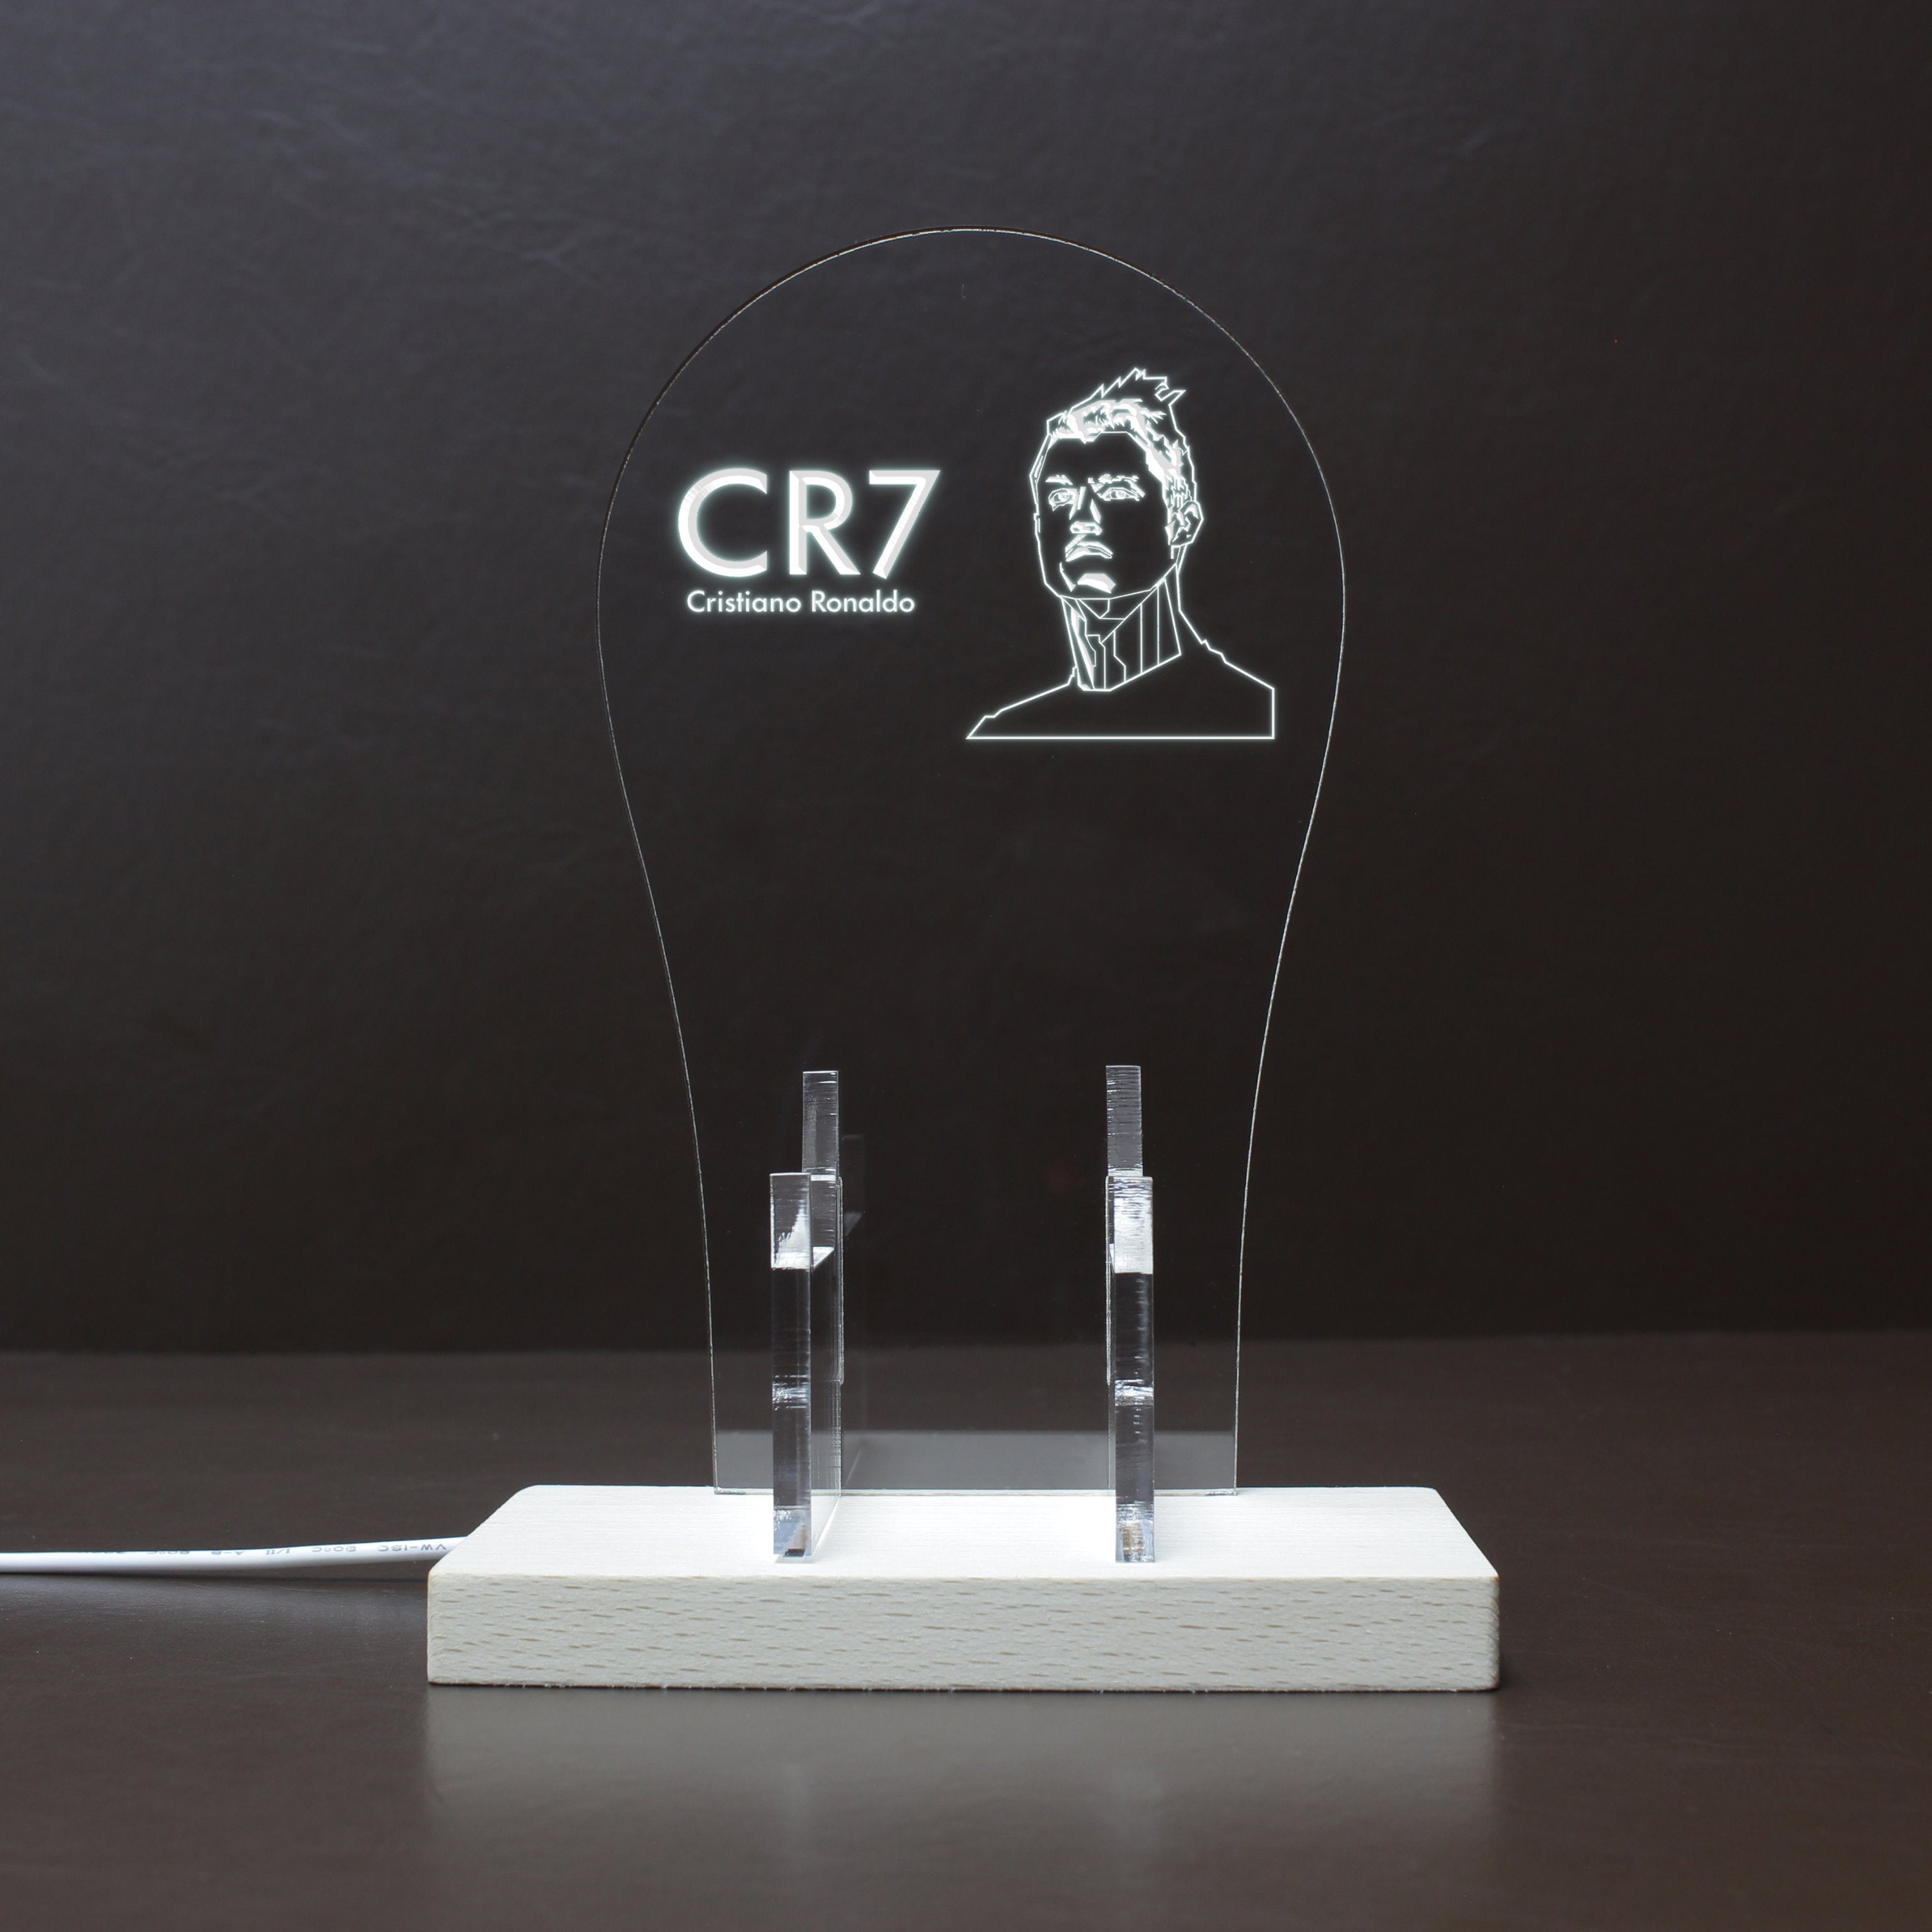 Cristiano-Ronaldo-Cr7 RGB LED Gaming Headset Controller Stand